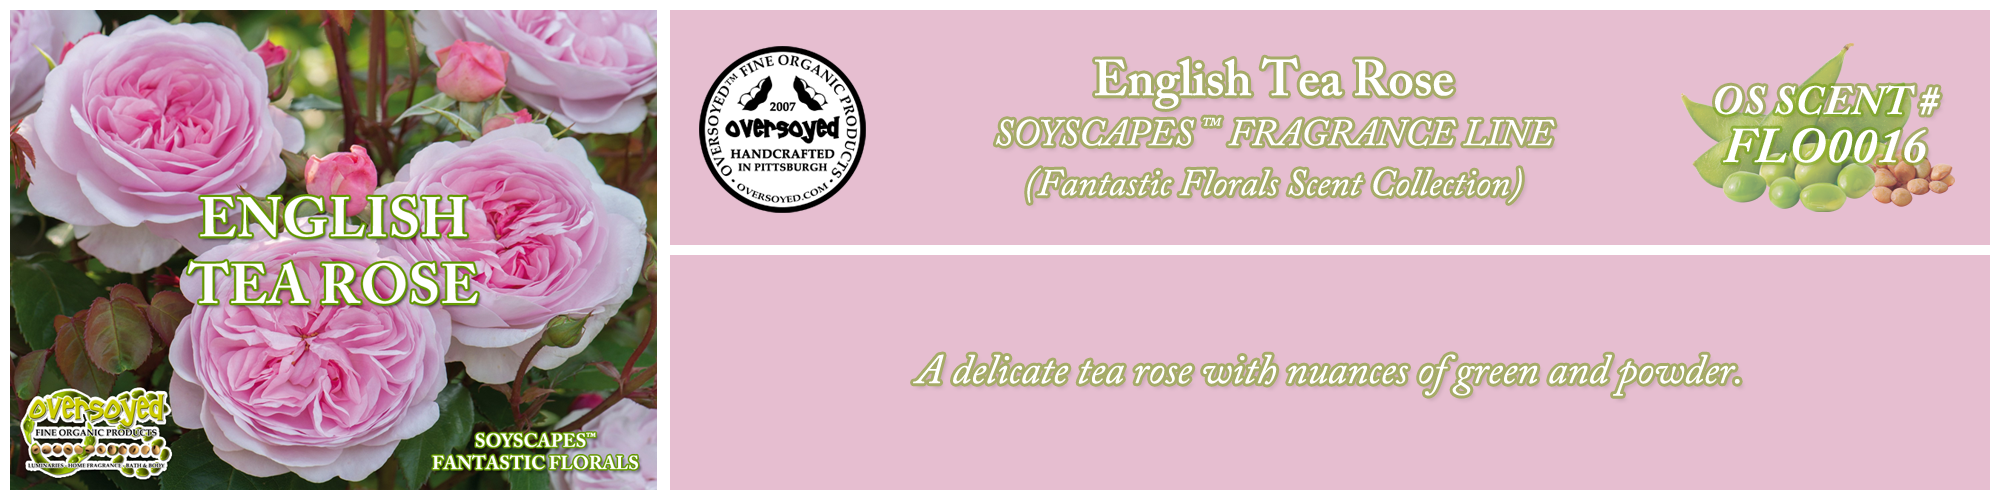 English Tea Rose Handcrafted Products Collection